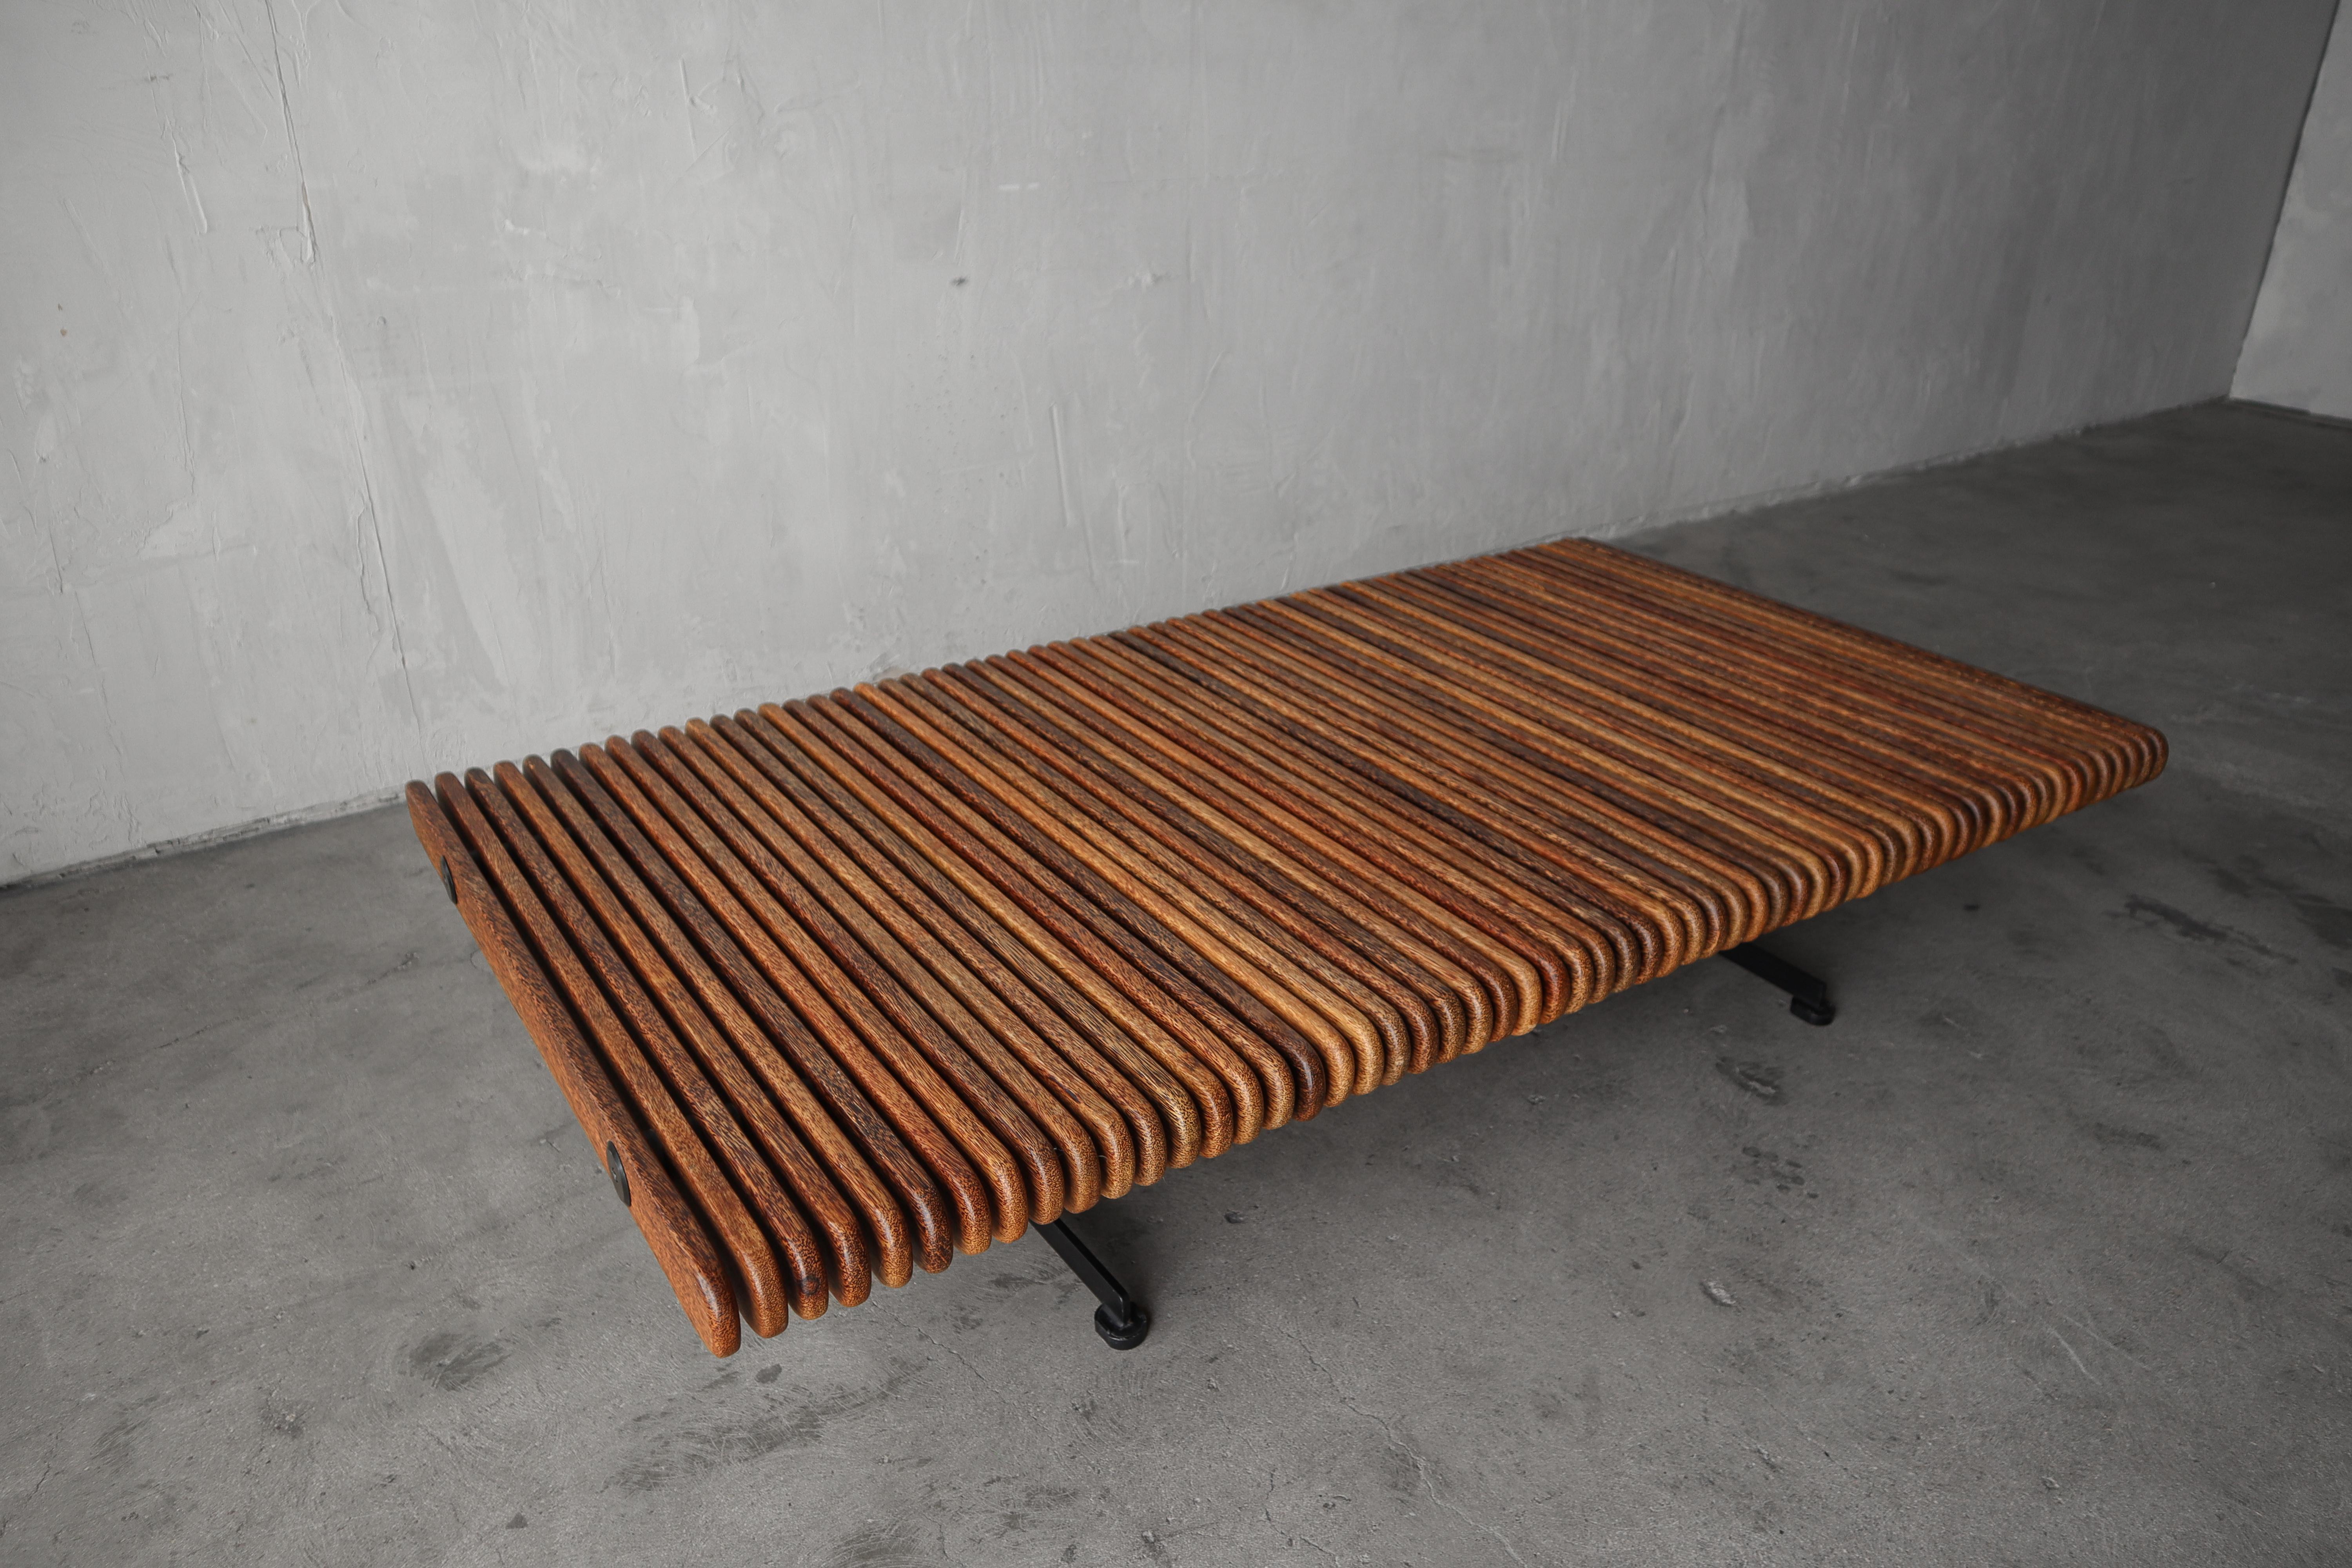 Yasawa Palmwood Slat Bench Coffee Table by Pacific Green In Excellent Condition For Sale In Las Vegas, NV